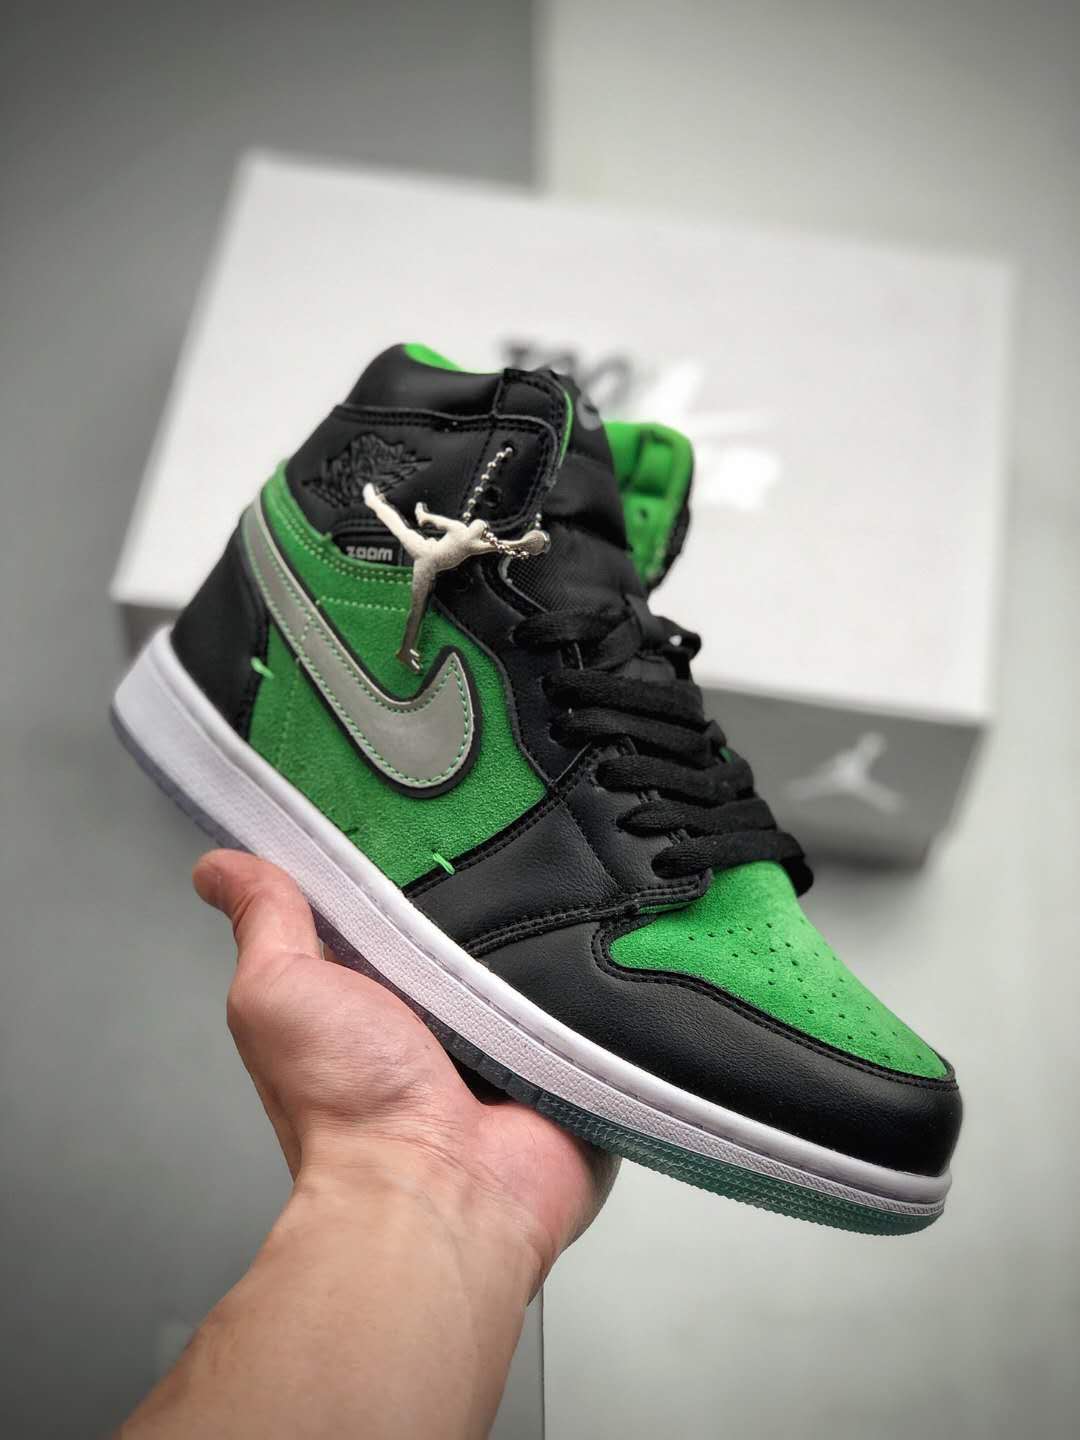 Air Jordan 1 High Zoom Rage Green CK6637-300 - Iconic Green Sneakers | Limited Edition